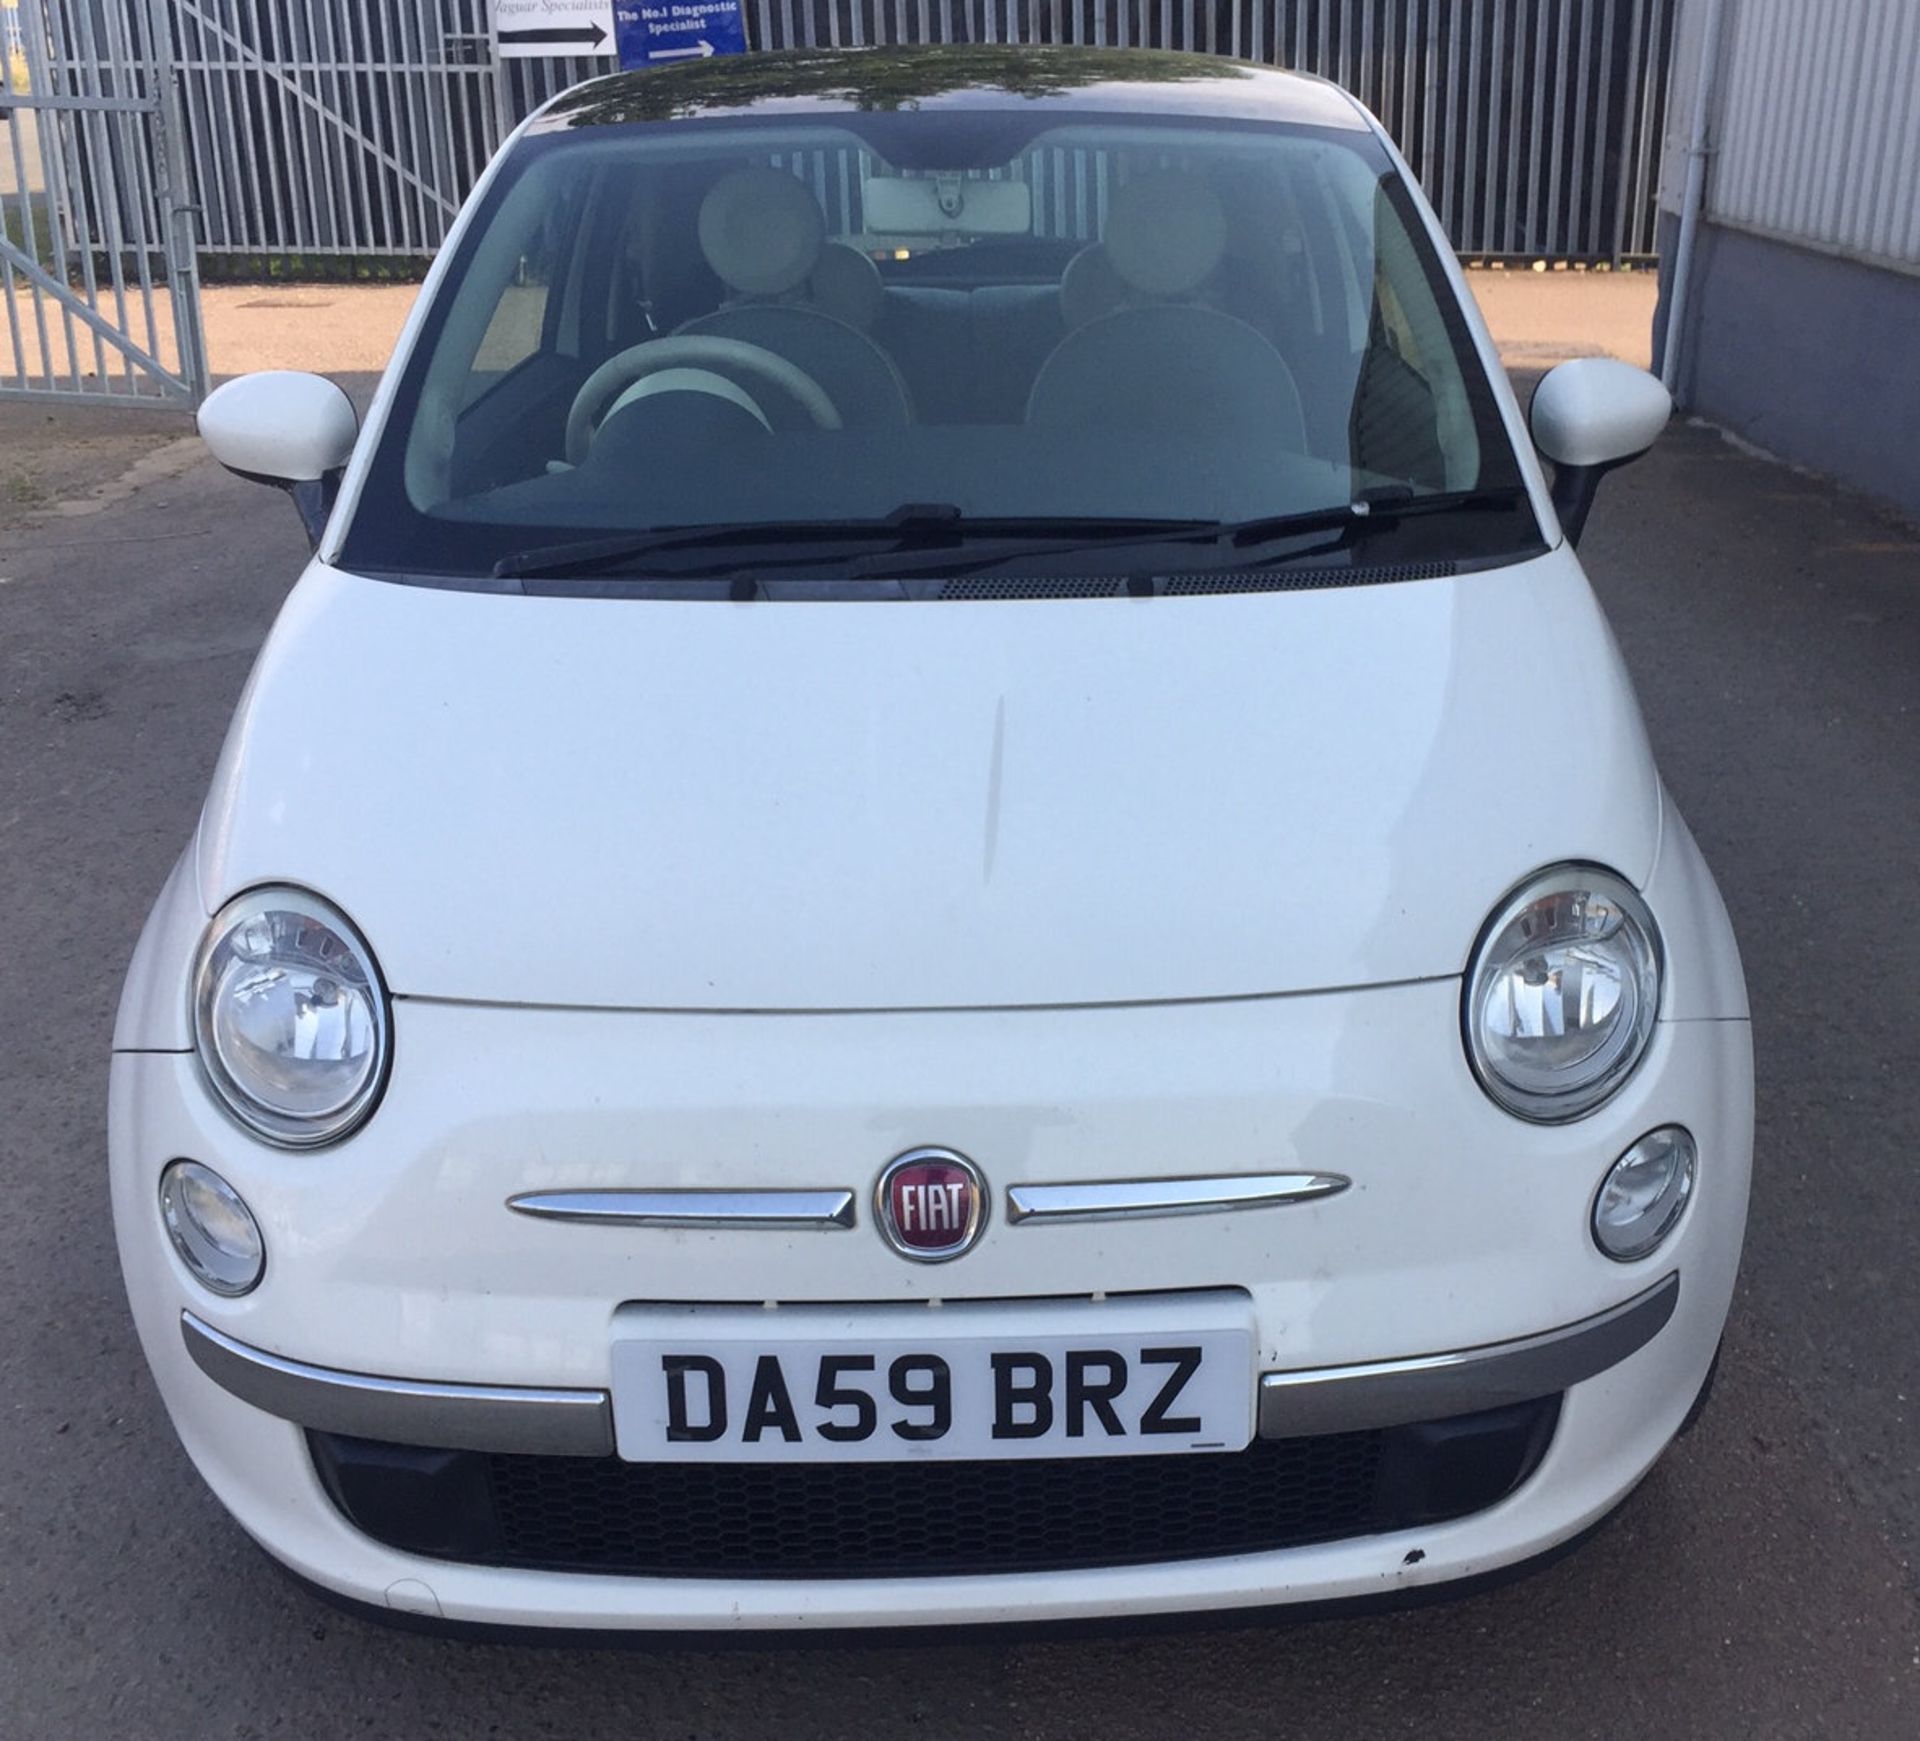 2009 Fiat 500 1.2 Lounge 3 Dr Hatchback - CL505 - NO VAT ON THE HAMMER - Location: Corby, Northampto - Image 5 of 12